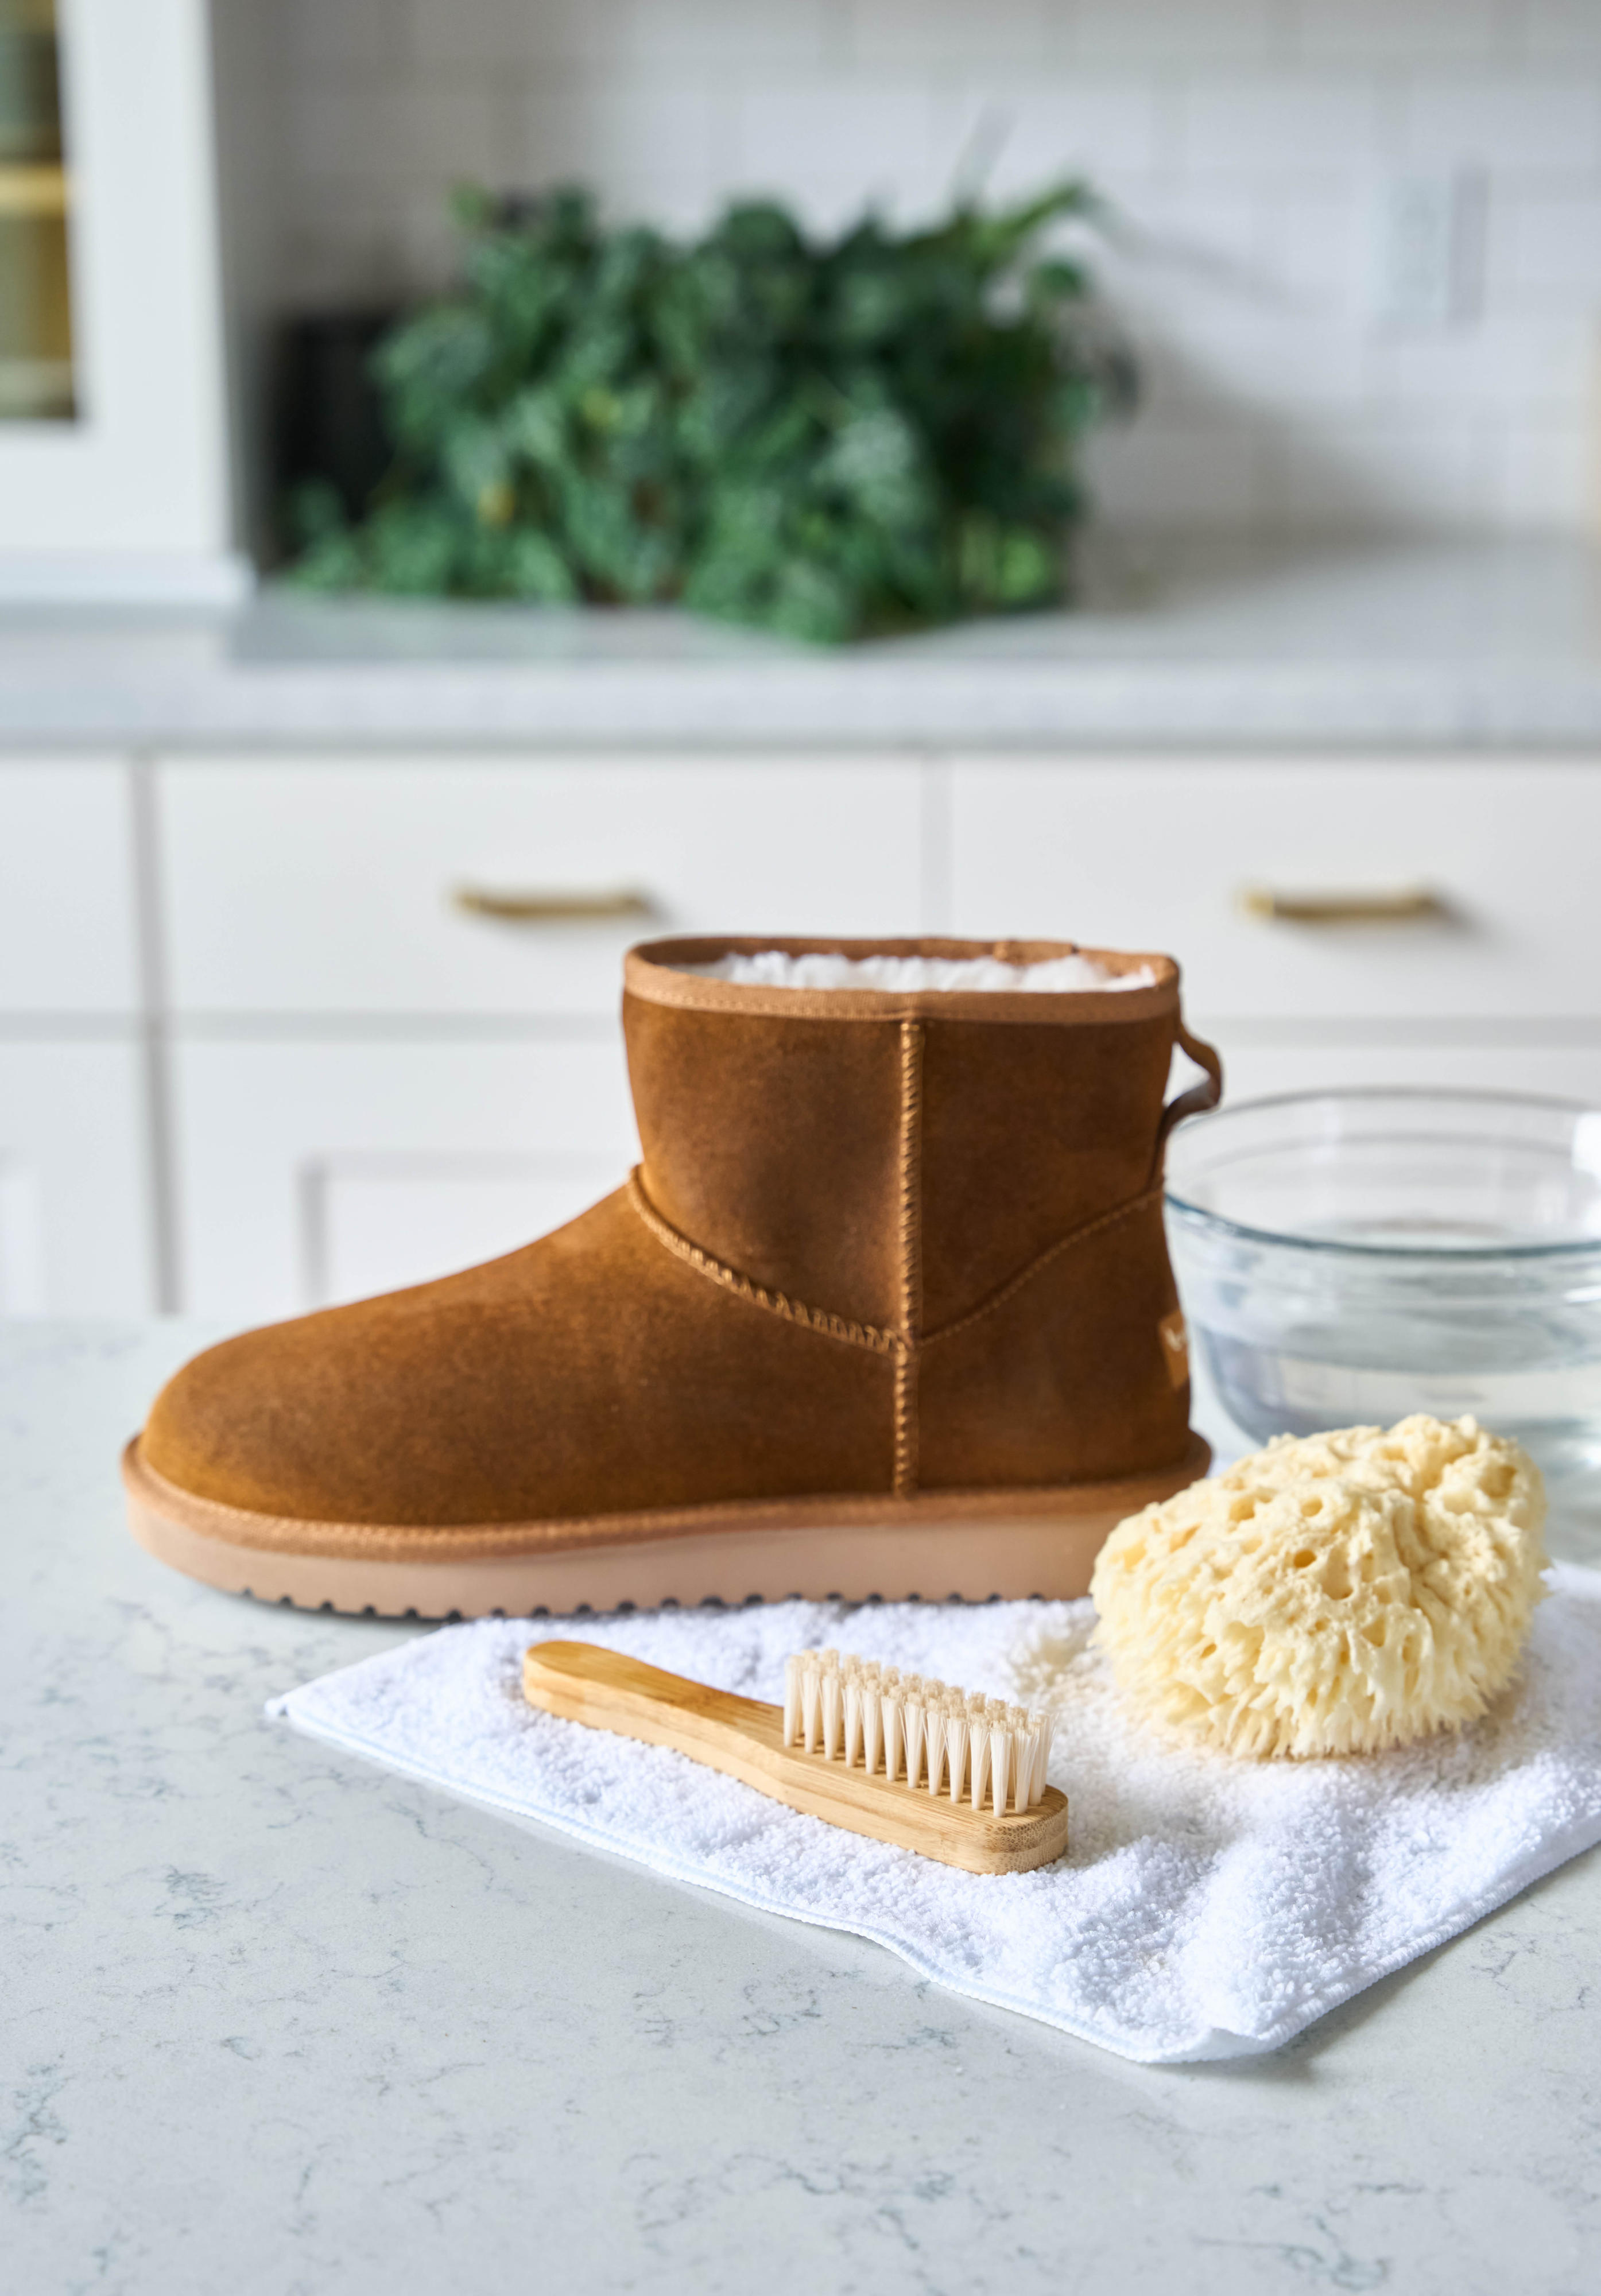 Restoring Ugg Boots  How to Clean Your Uggs So They Look New